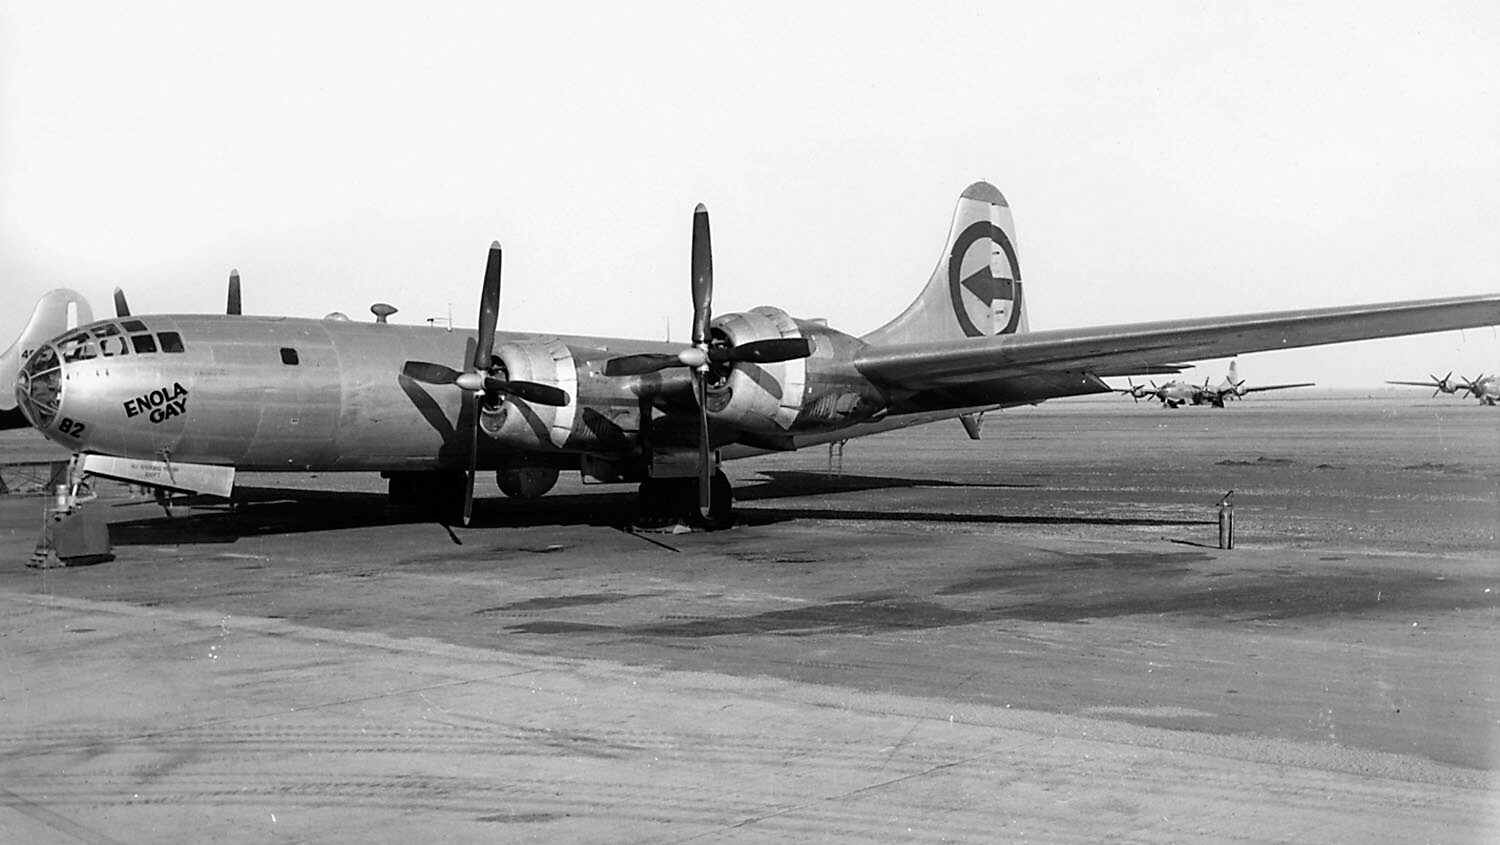 The four engine B-29 Superfortress Enola Gay sits on an airfield tarmac. The bomber’s tricycle landing gear is plainly visible in this photo. The B-29 featured numerous innovations, including a pressurized cabin. 